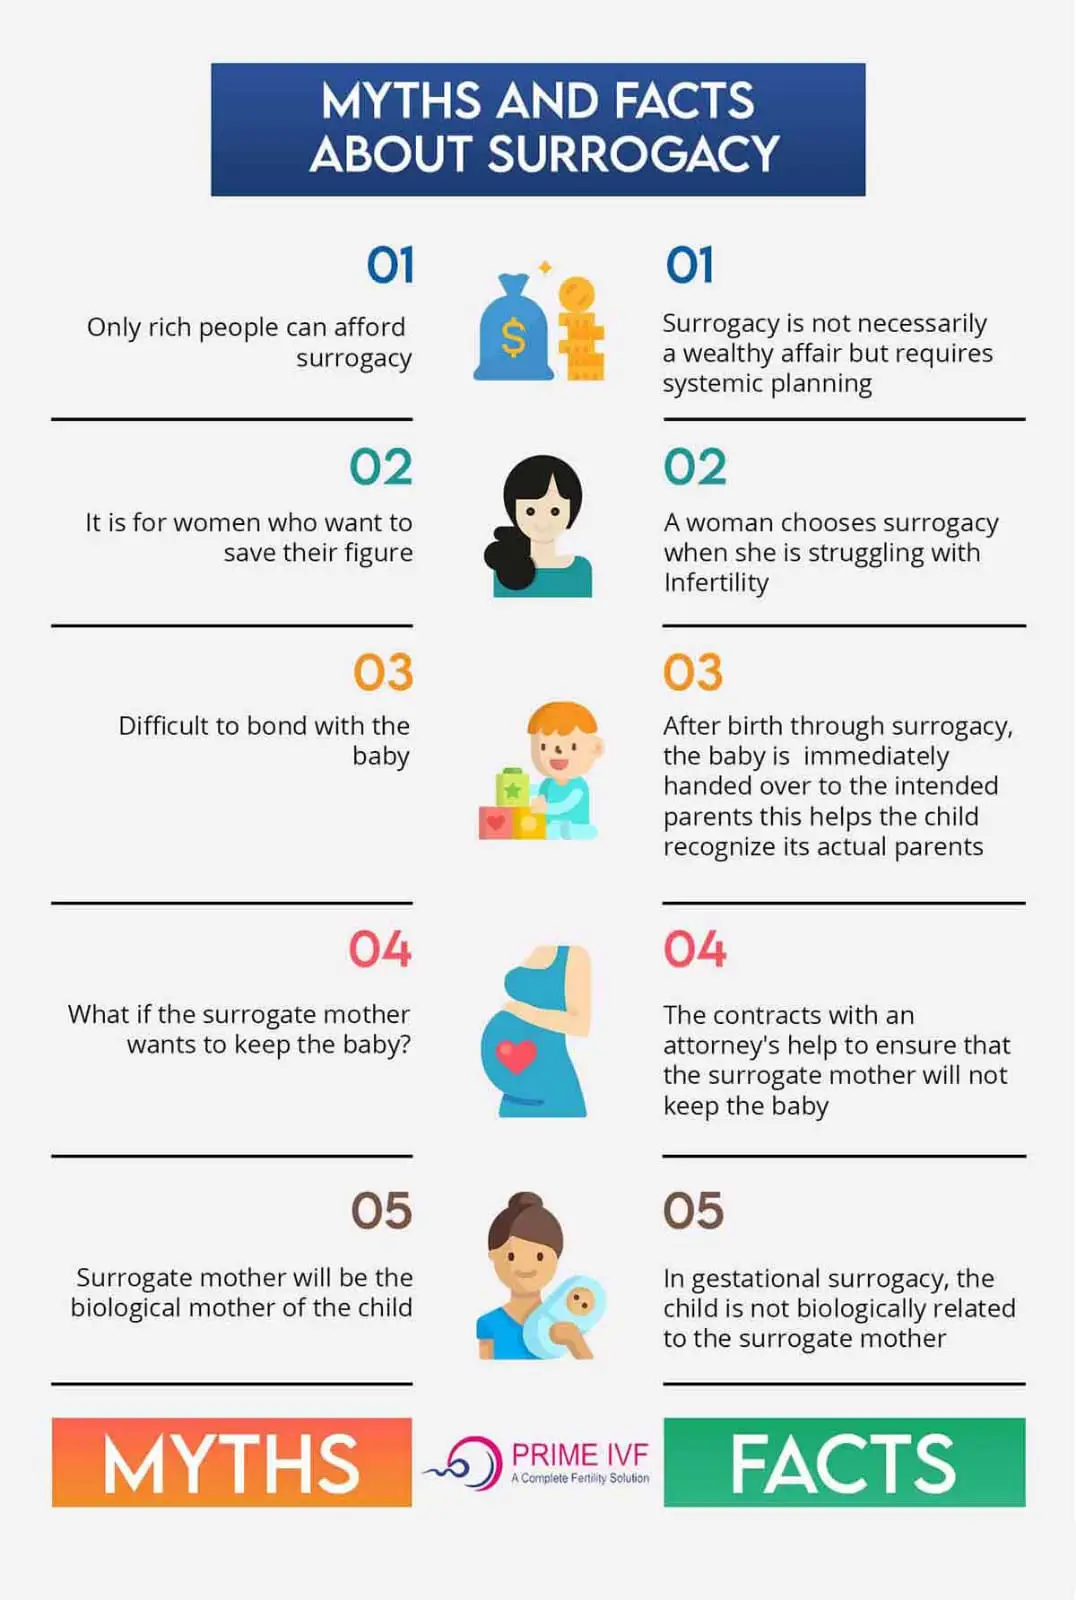 surrogacy-facts-myths-history